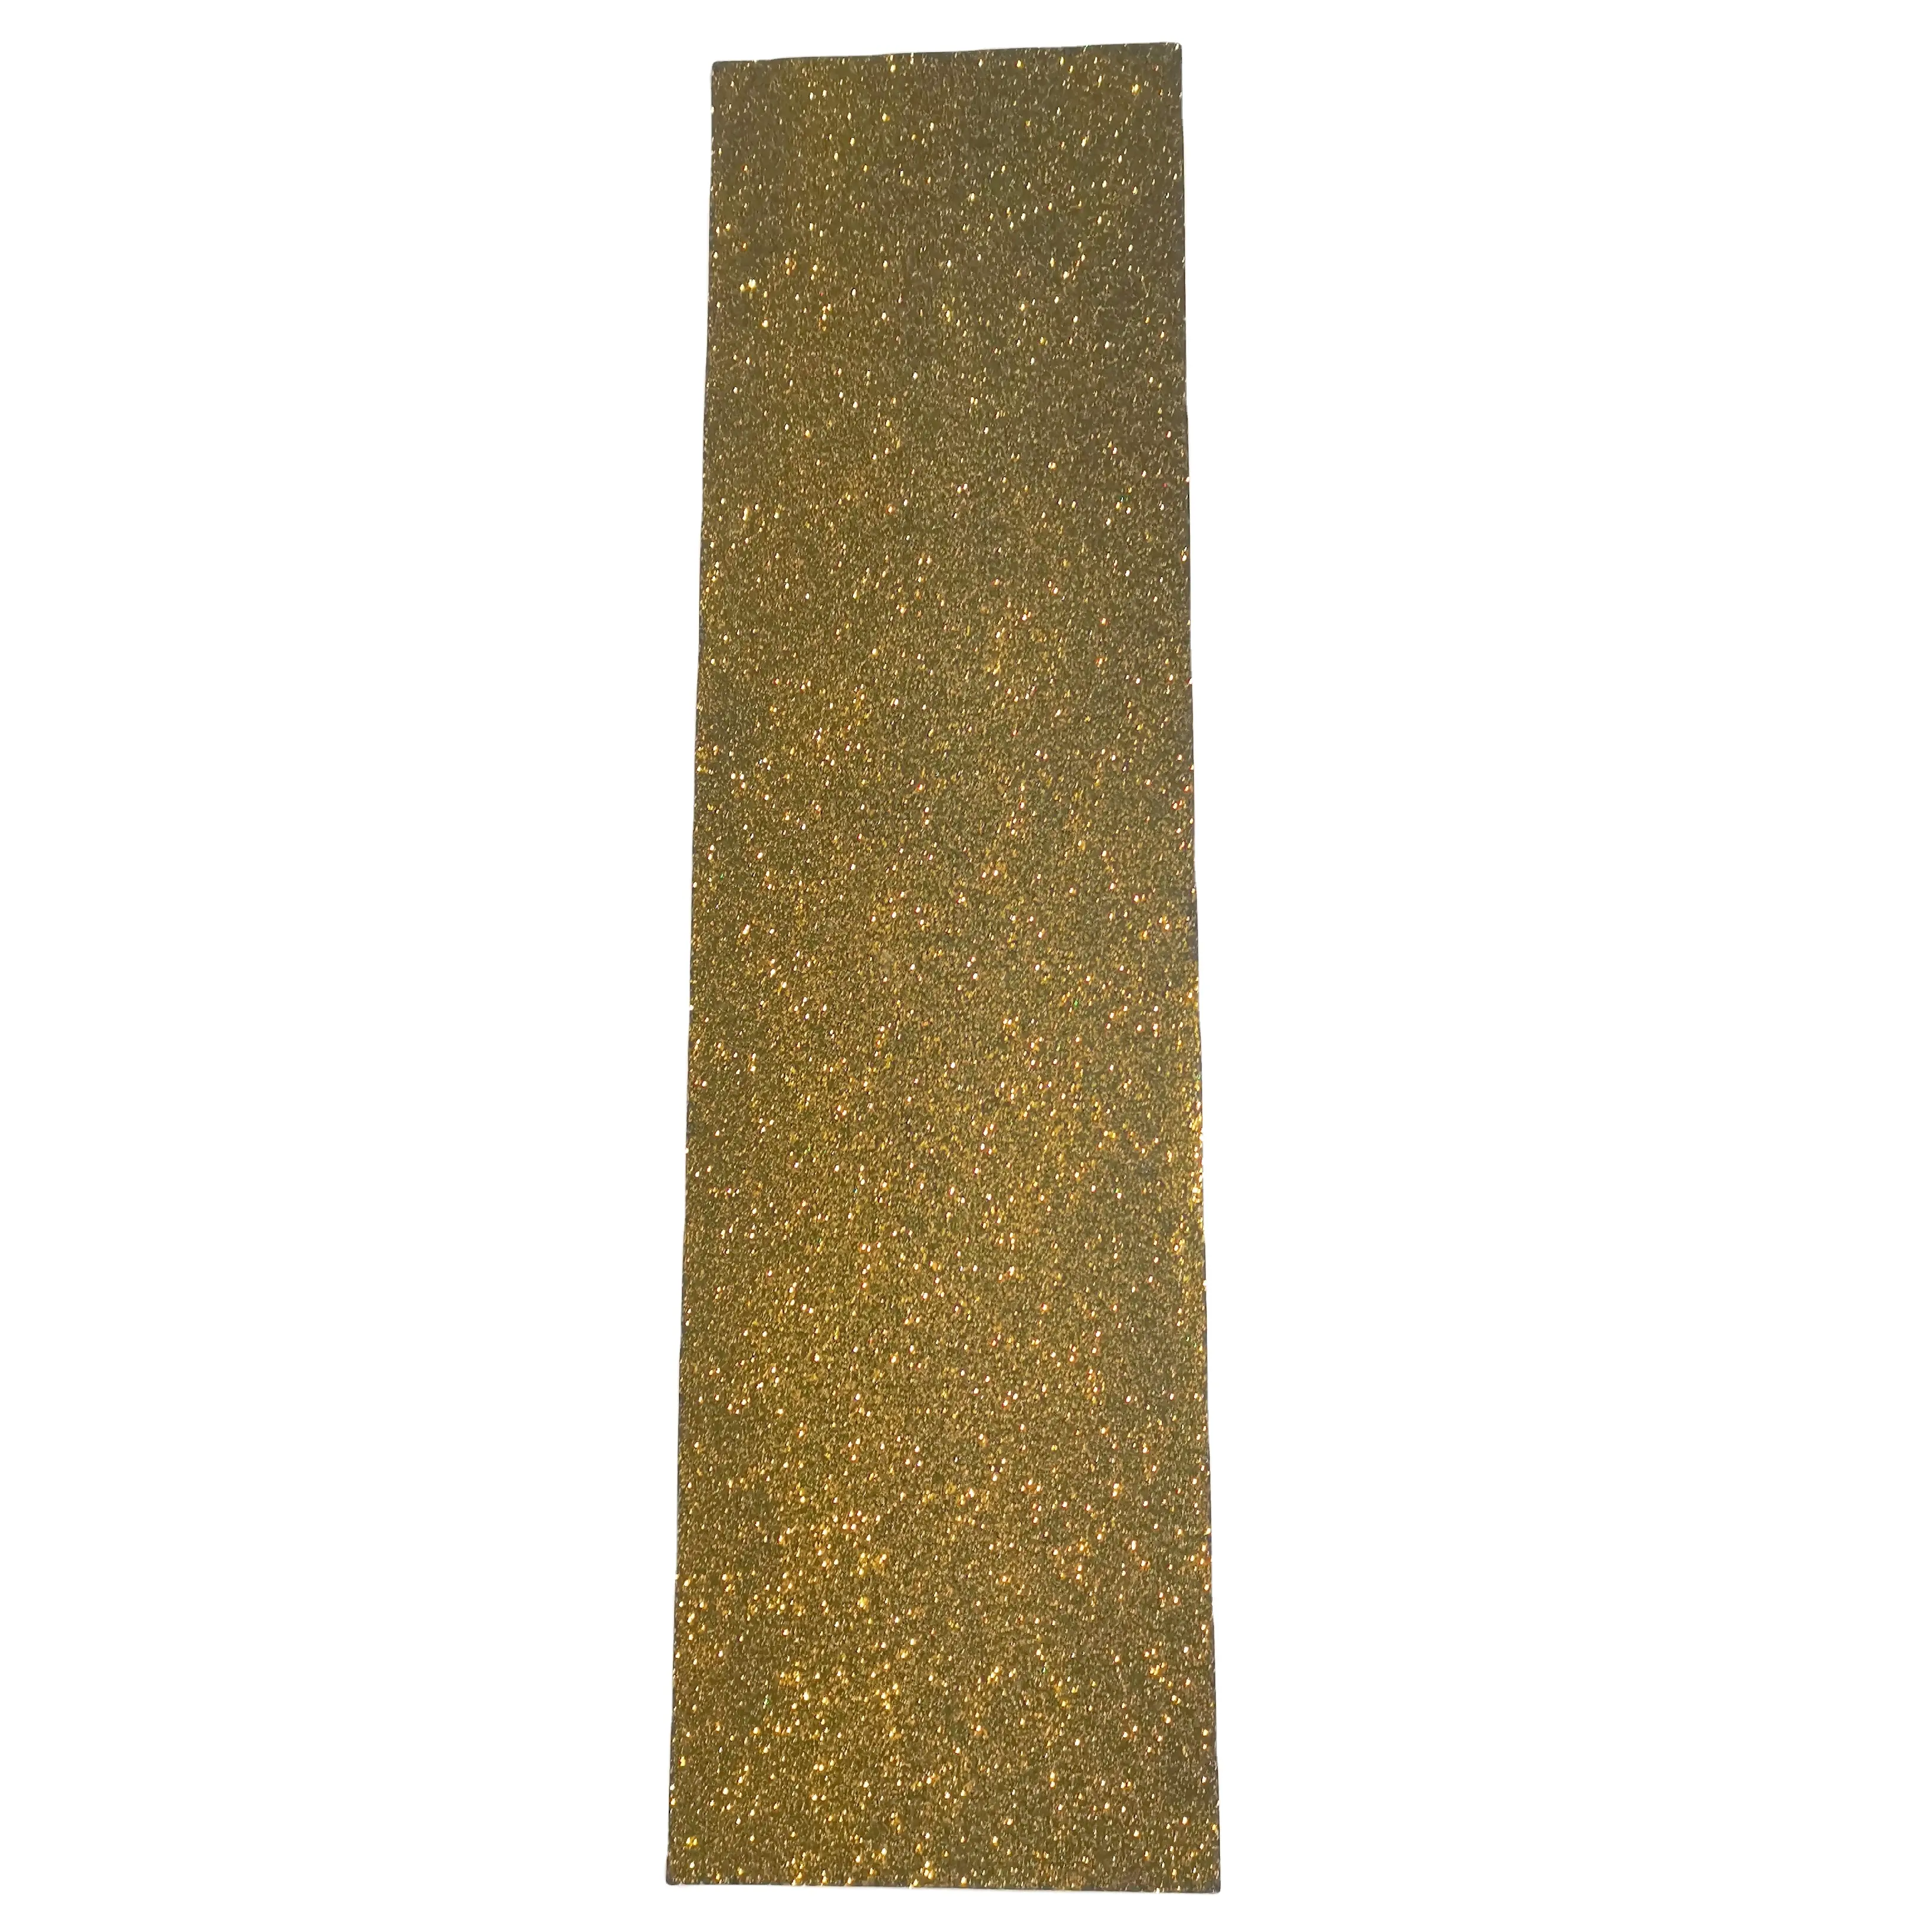 Custom Waterproof OS780 Skateboard Longboard Grip Tape with UV Printing in Different Glitter Colors